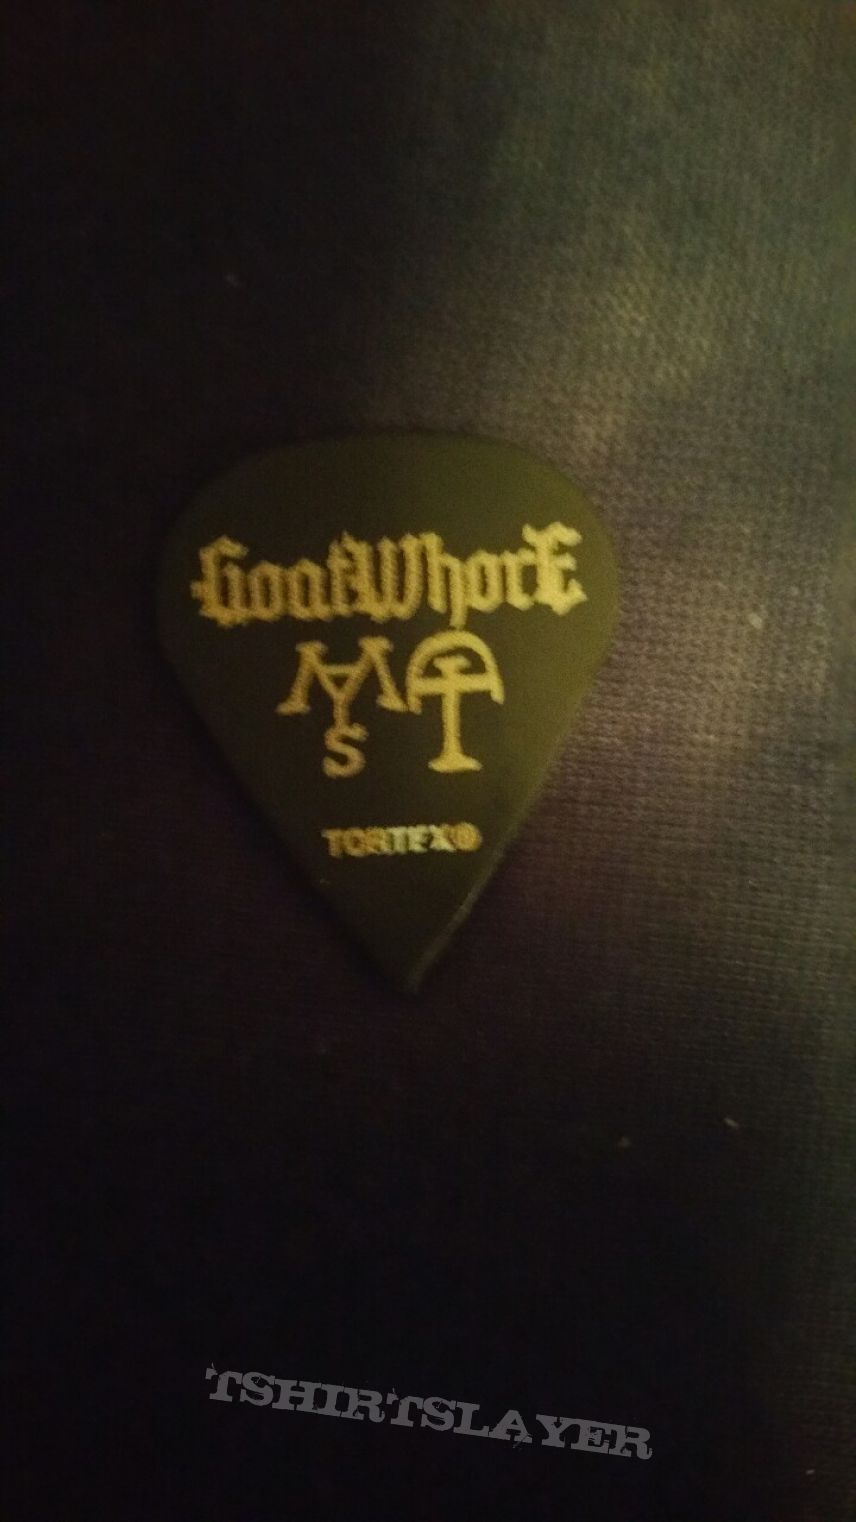 Goatwhore Sammy duet constricting rage of the merciless used guitar pick